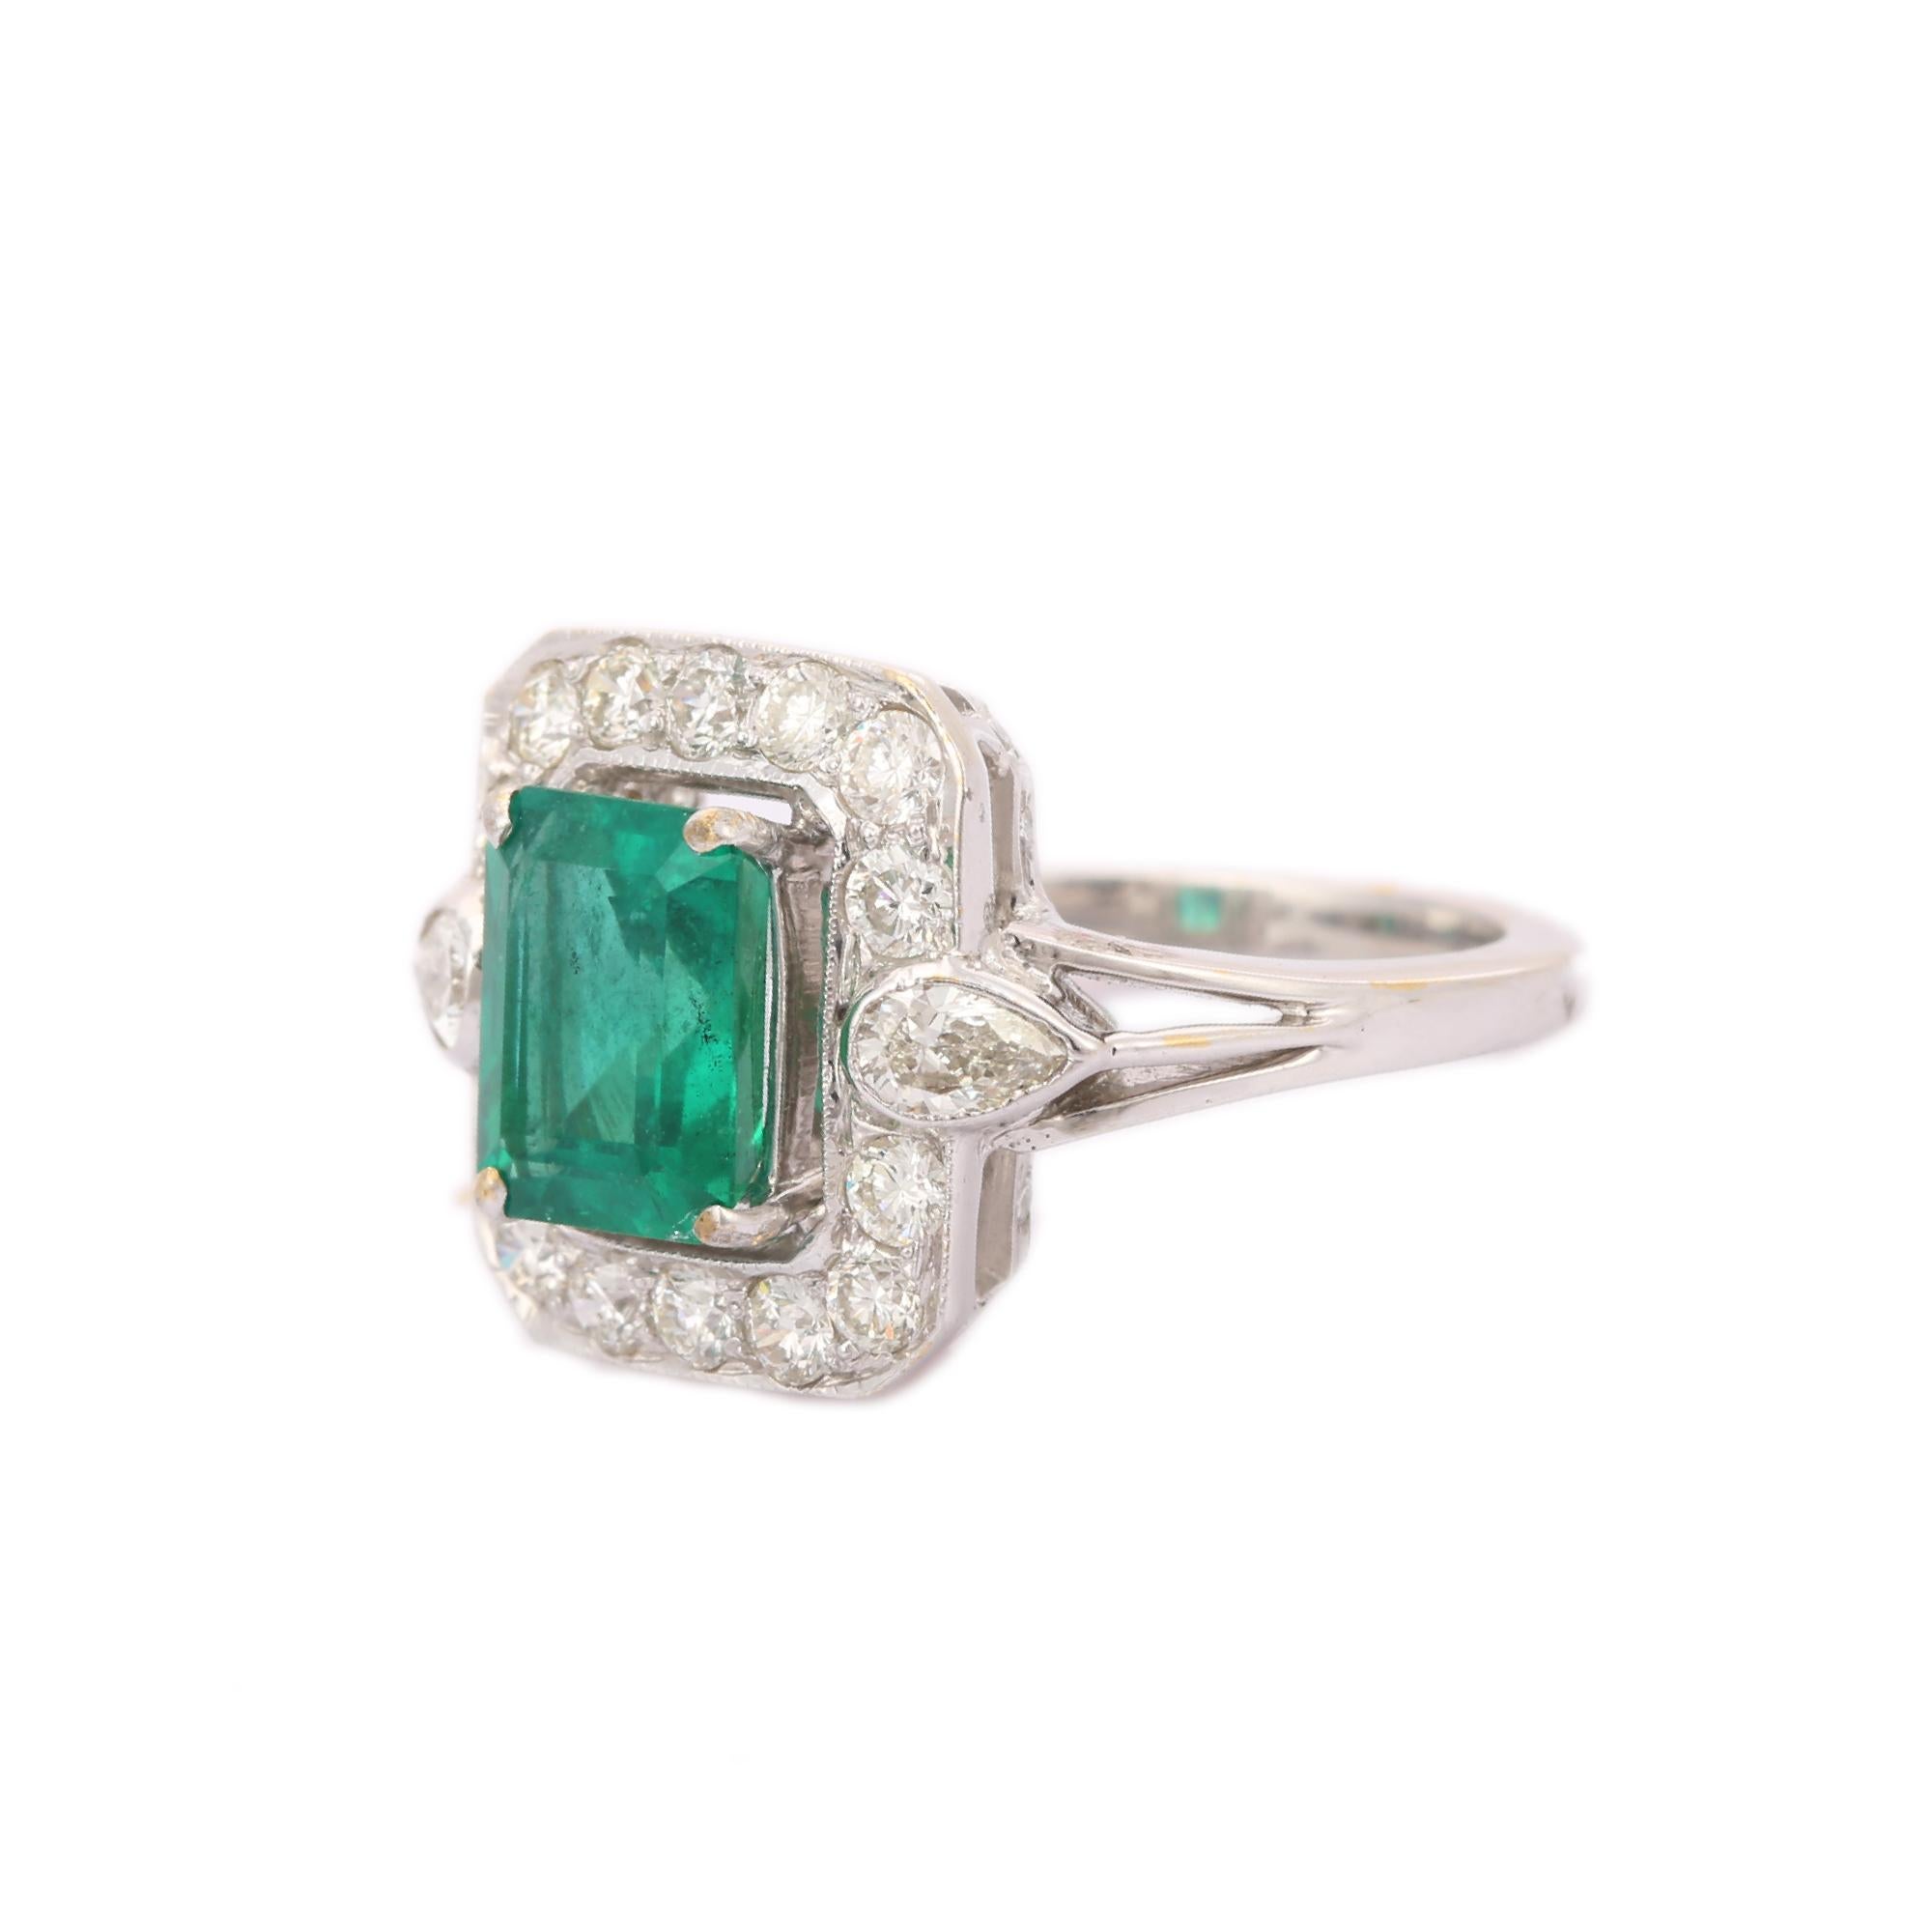 For Sale:  Exquisite 18kt Solid White Gold Emerald And Diamond Ring 5